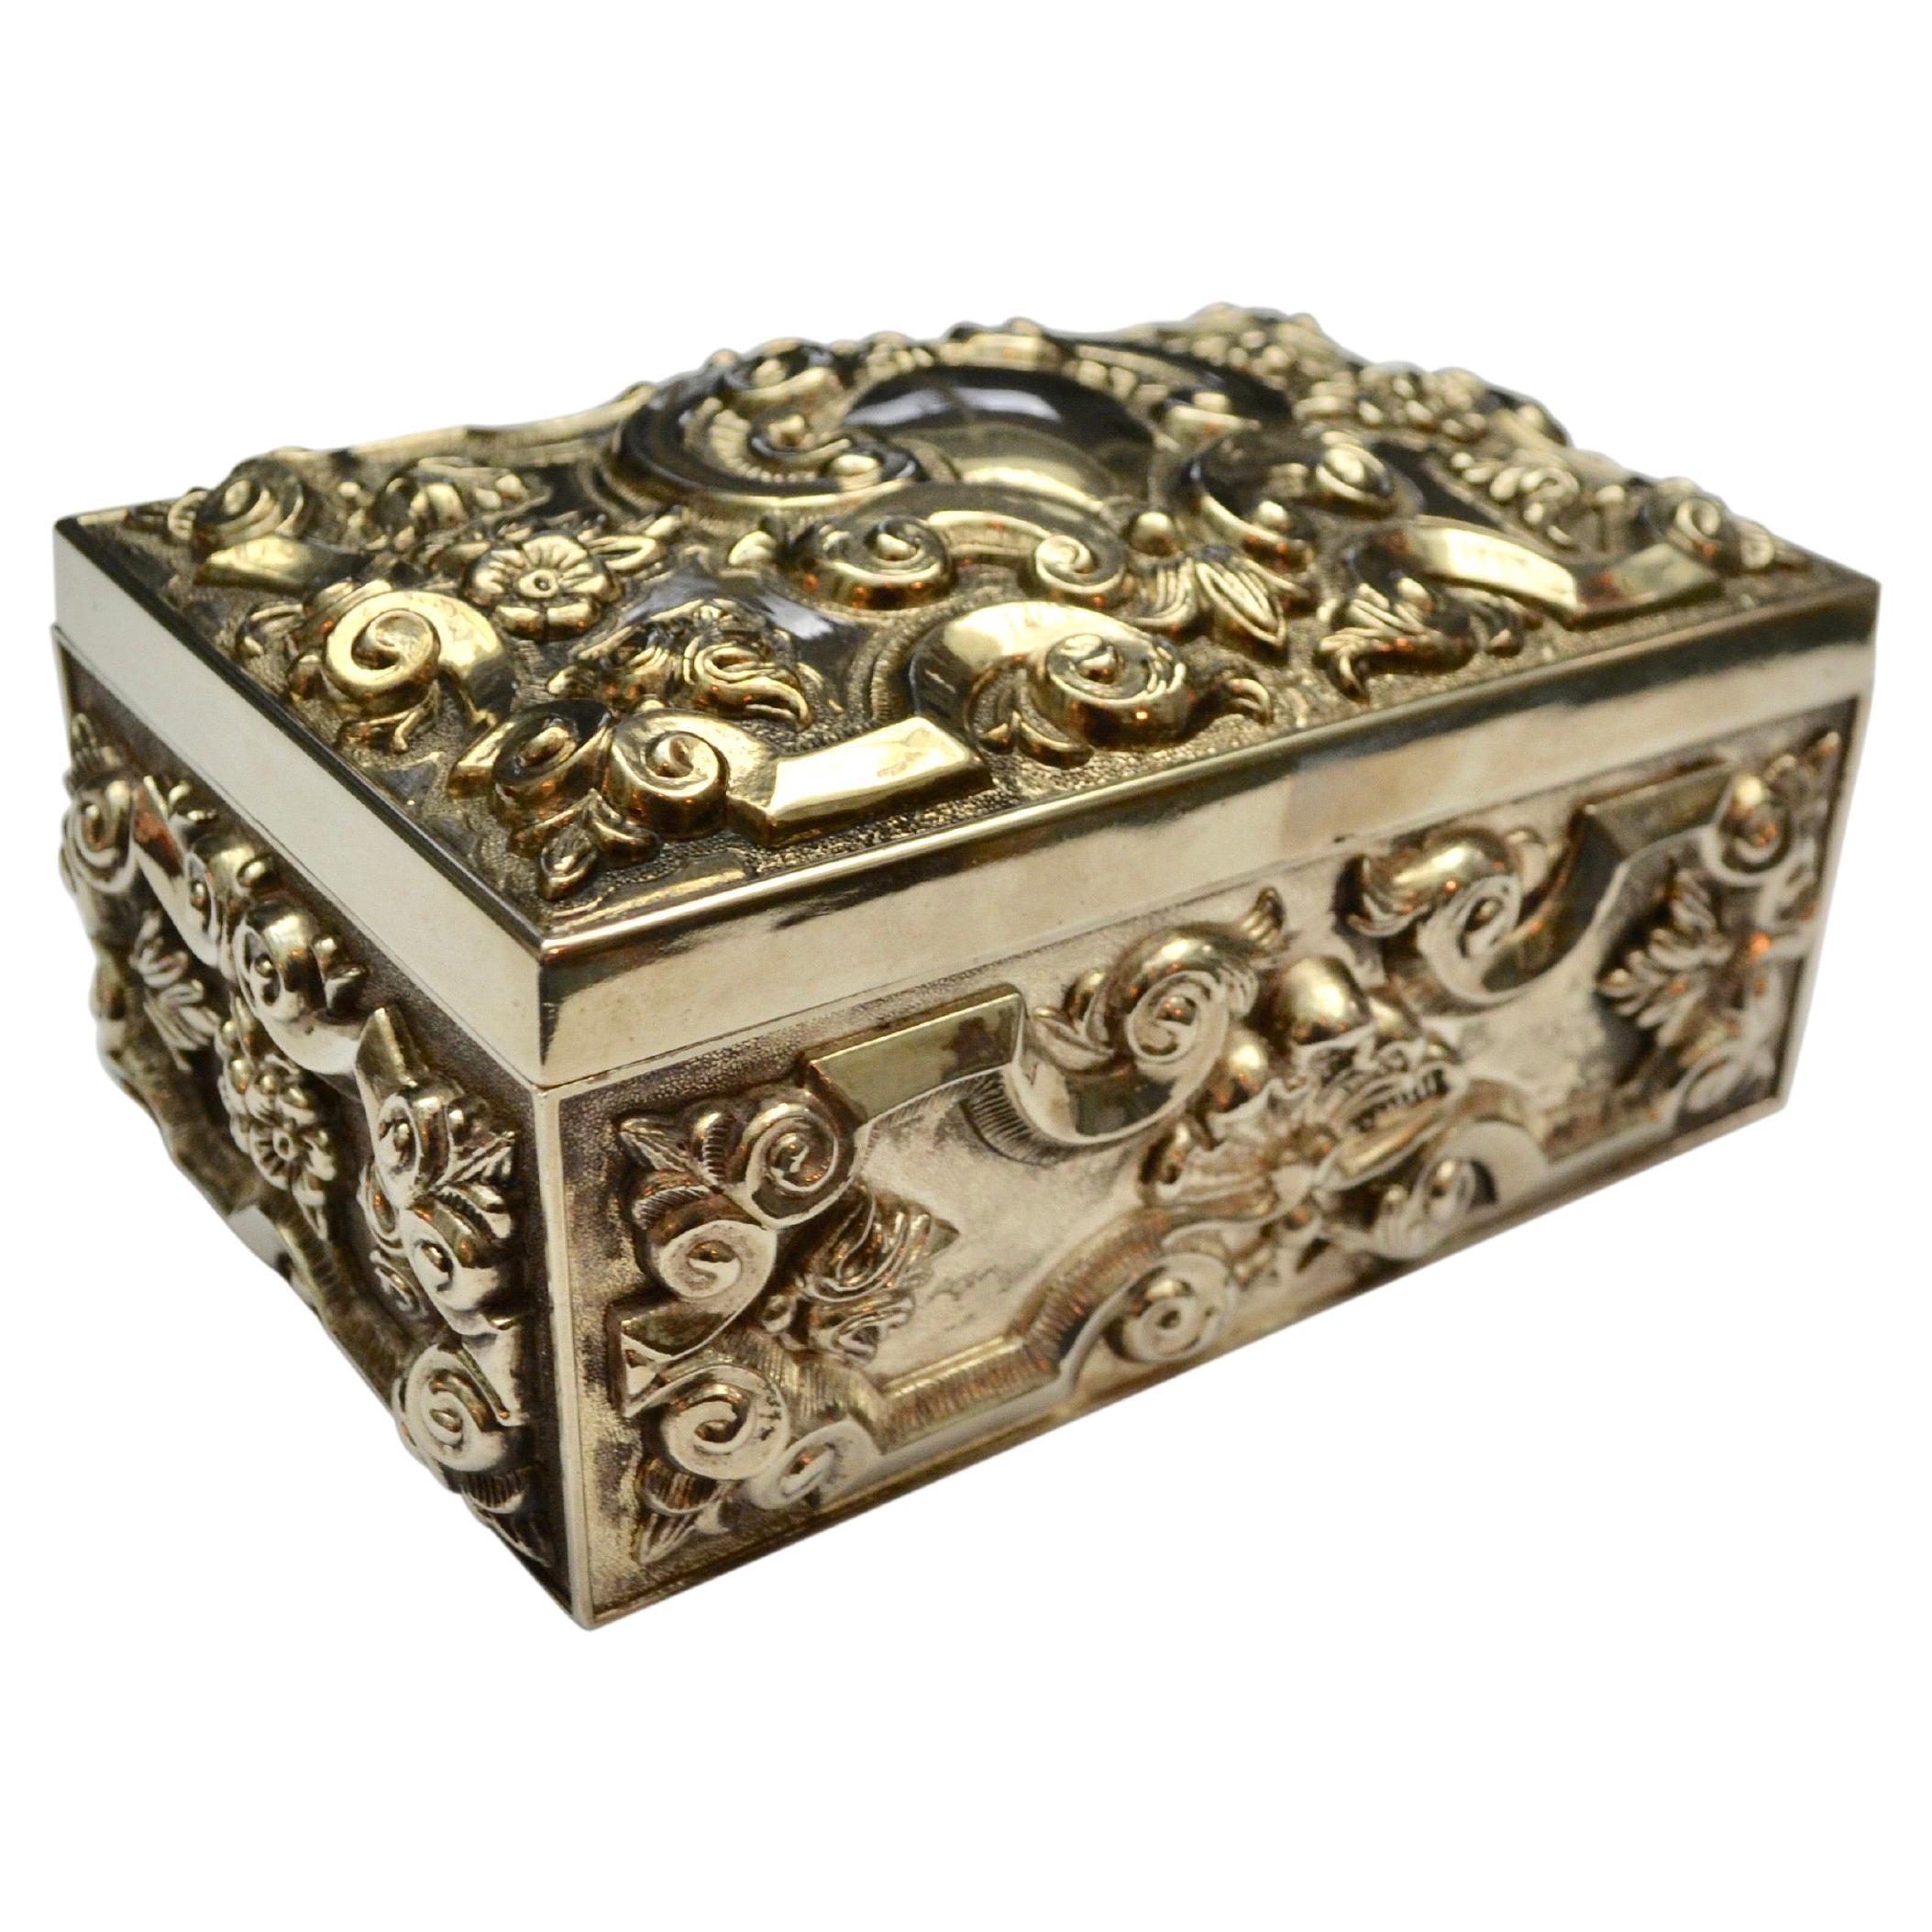 Siiver Plated Renaissance Revival Style Jewellery Box 